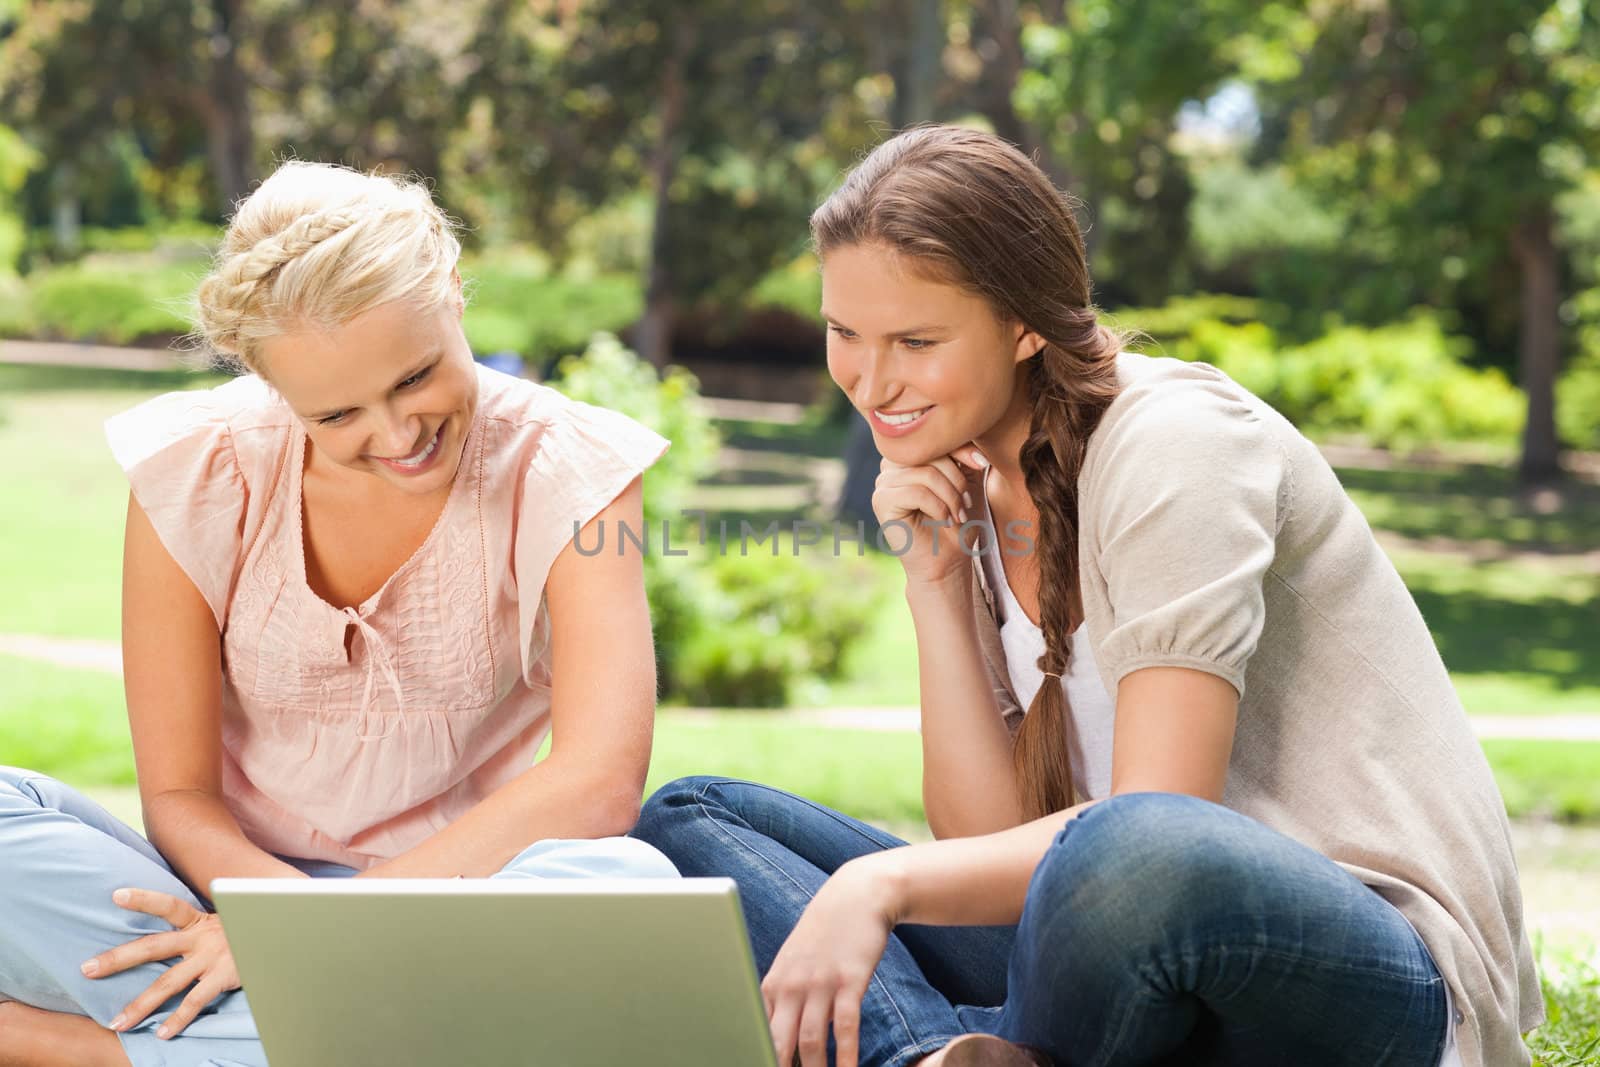 Smiling young women in the park with a laptop